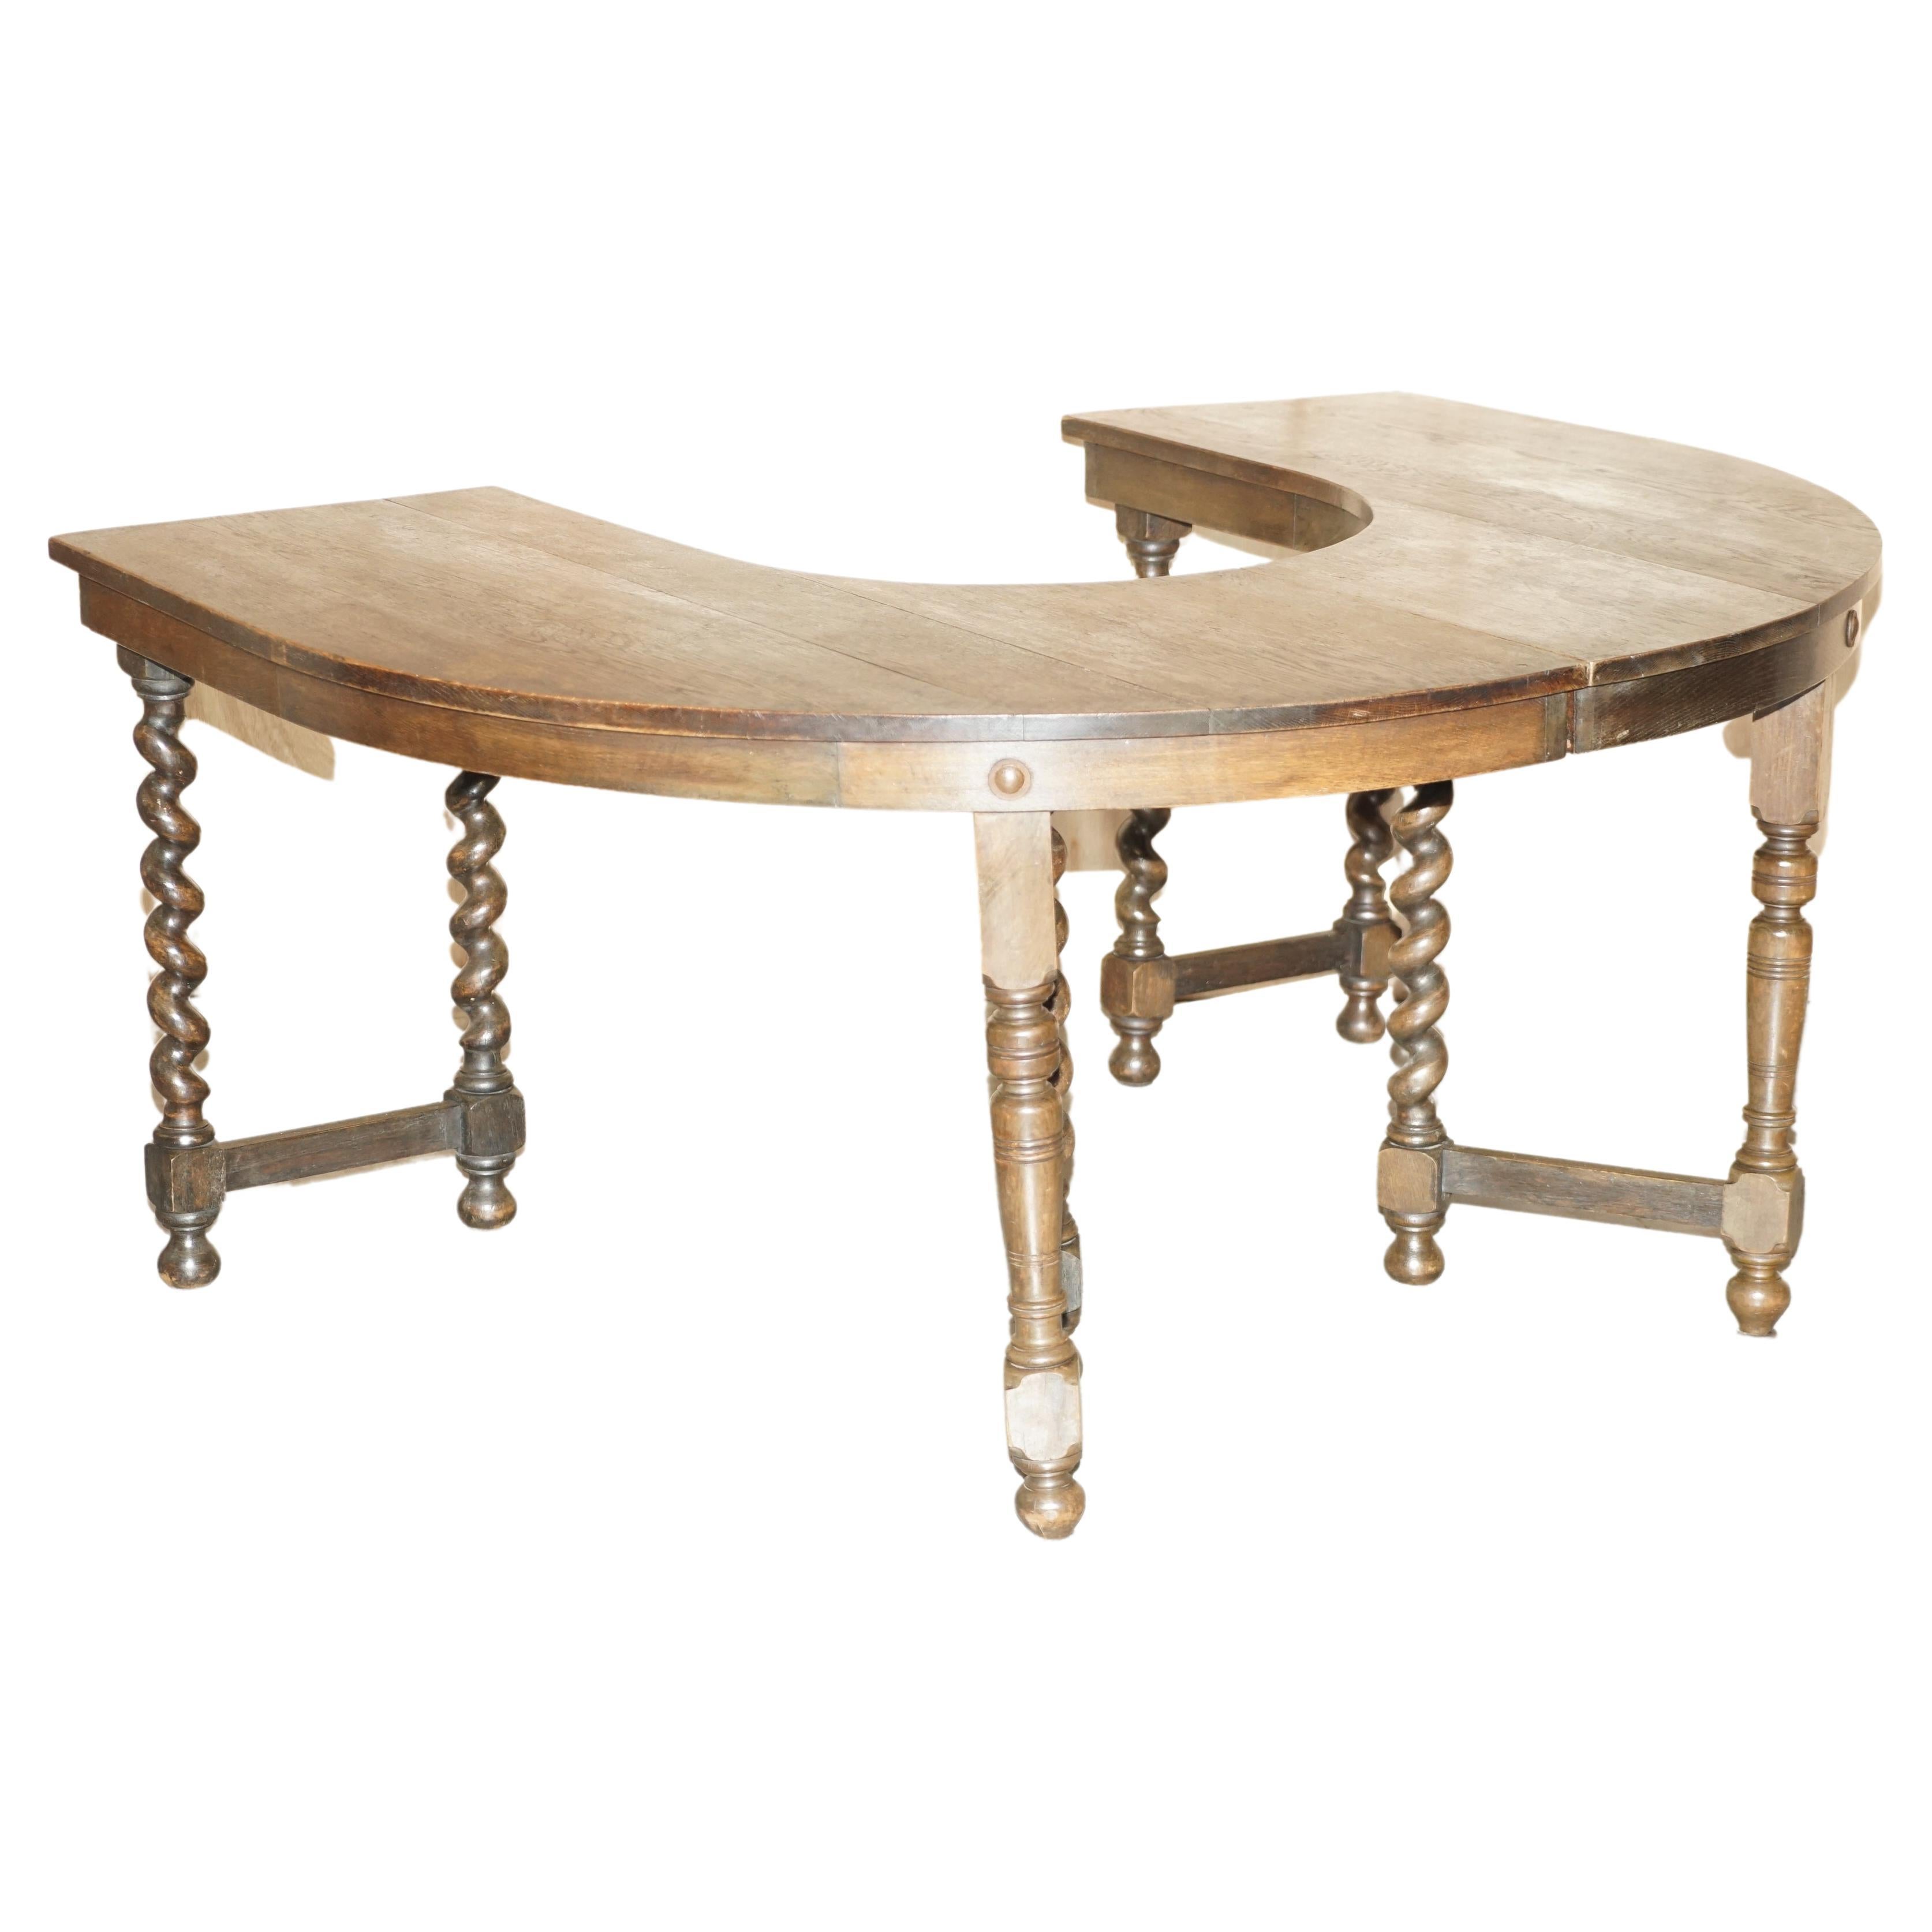 RARE & COLLECTABLE ANTIQUE JACOBEAN REVIVAL BARLEY TWiST LEG ENGLISH HUNT TABLE For Sale